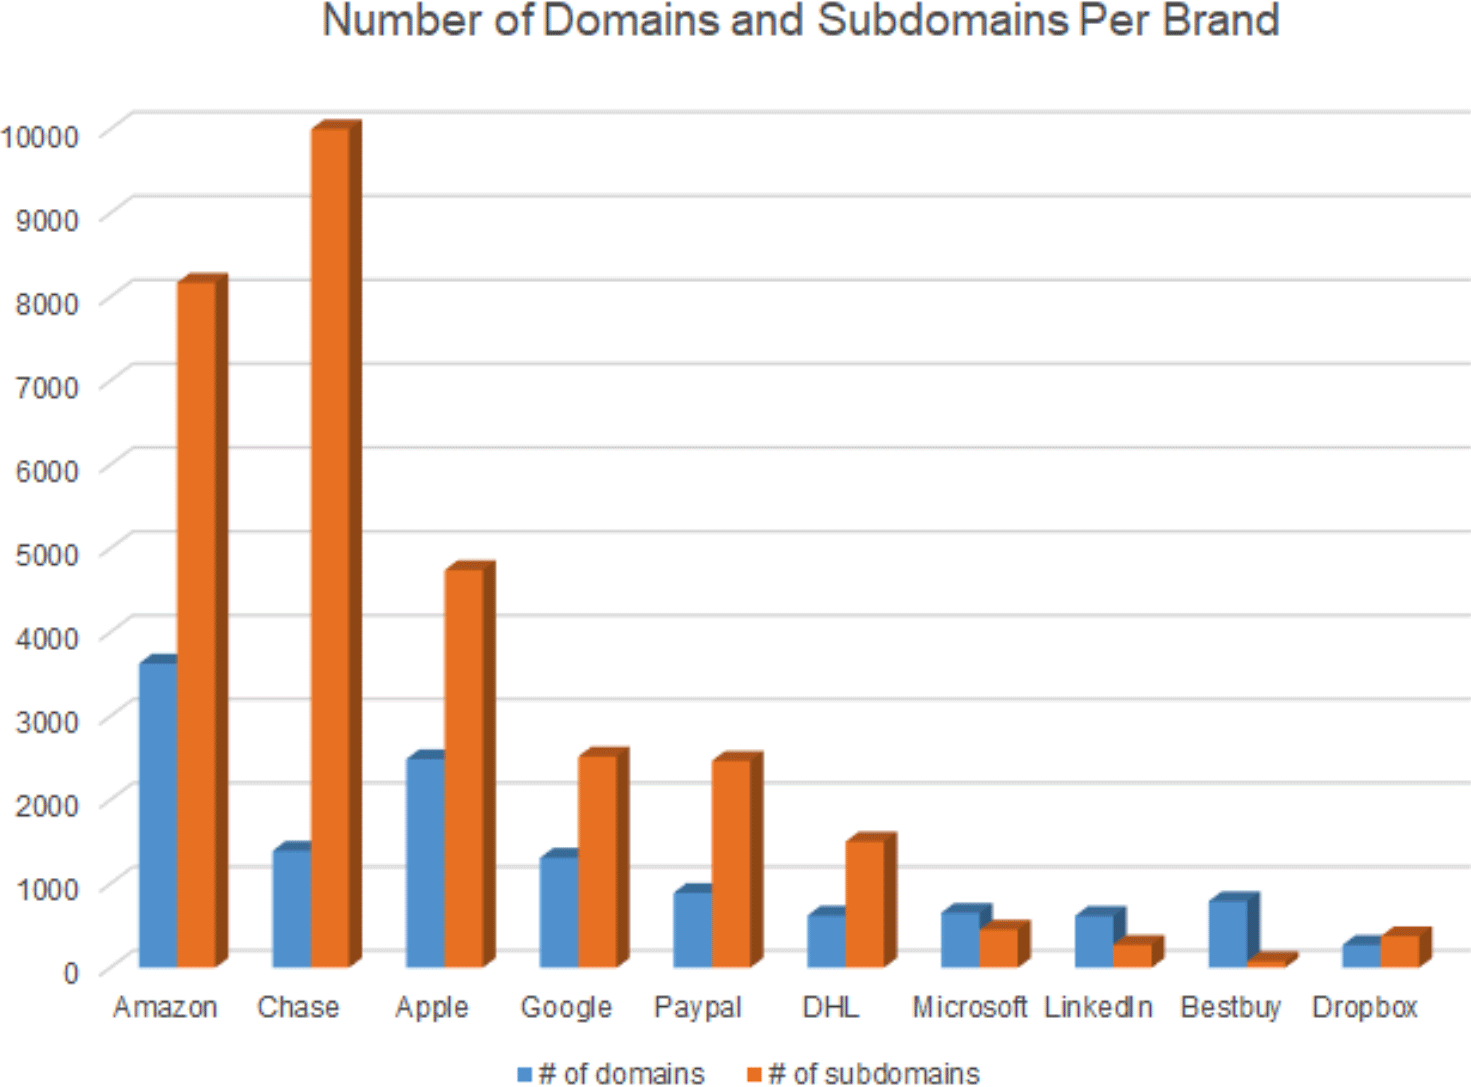 Q2 2021 Top 10 Most Impersonated Brands in Domains 23